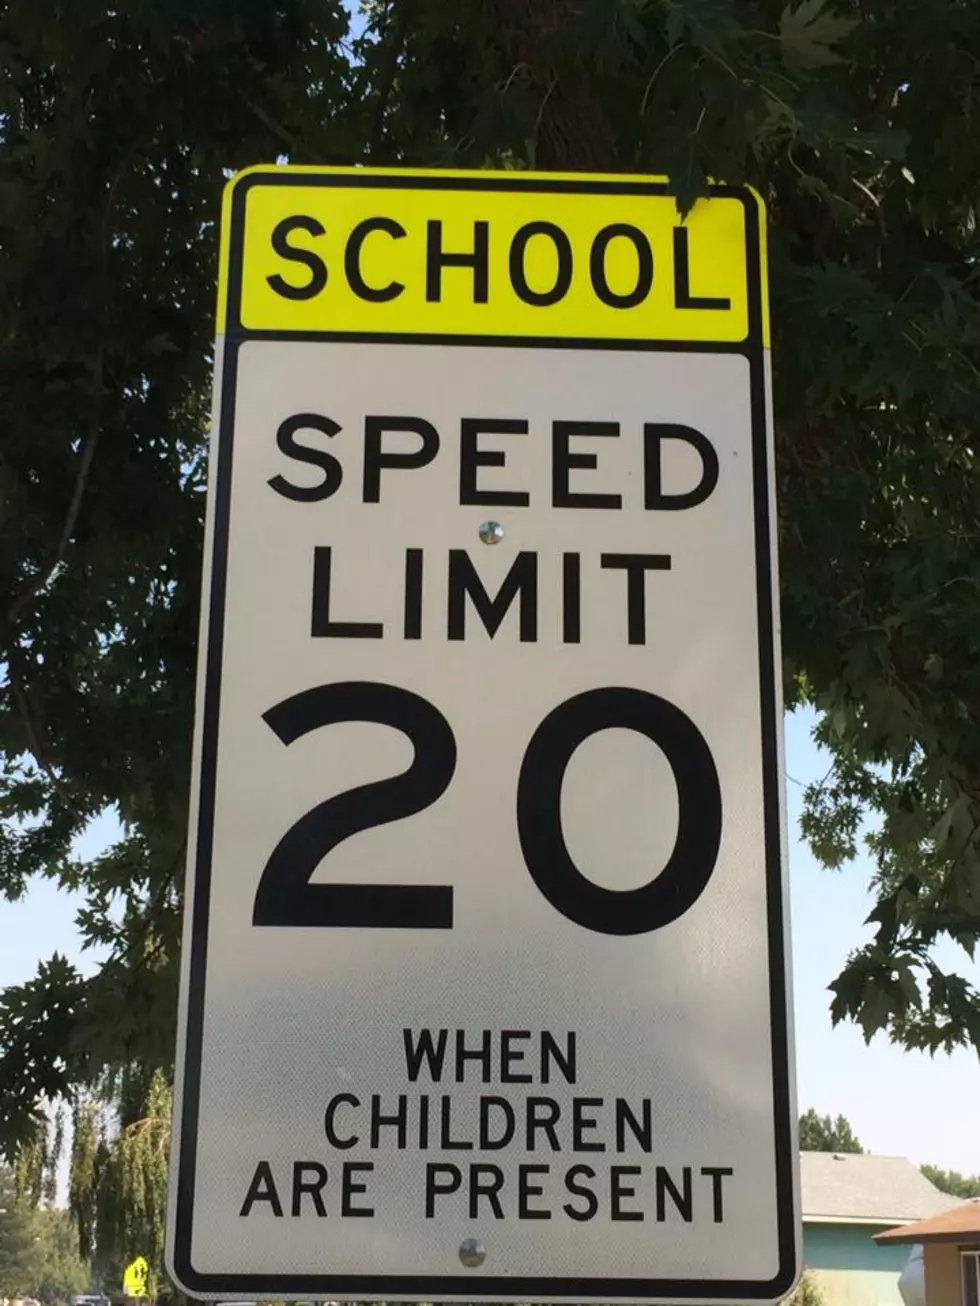 How Many School Zones Are There In Kennewick?